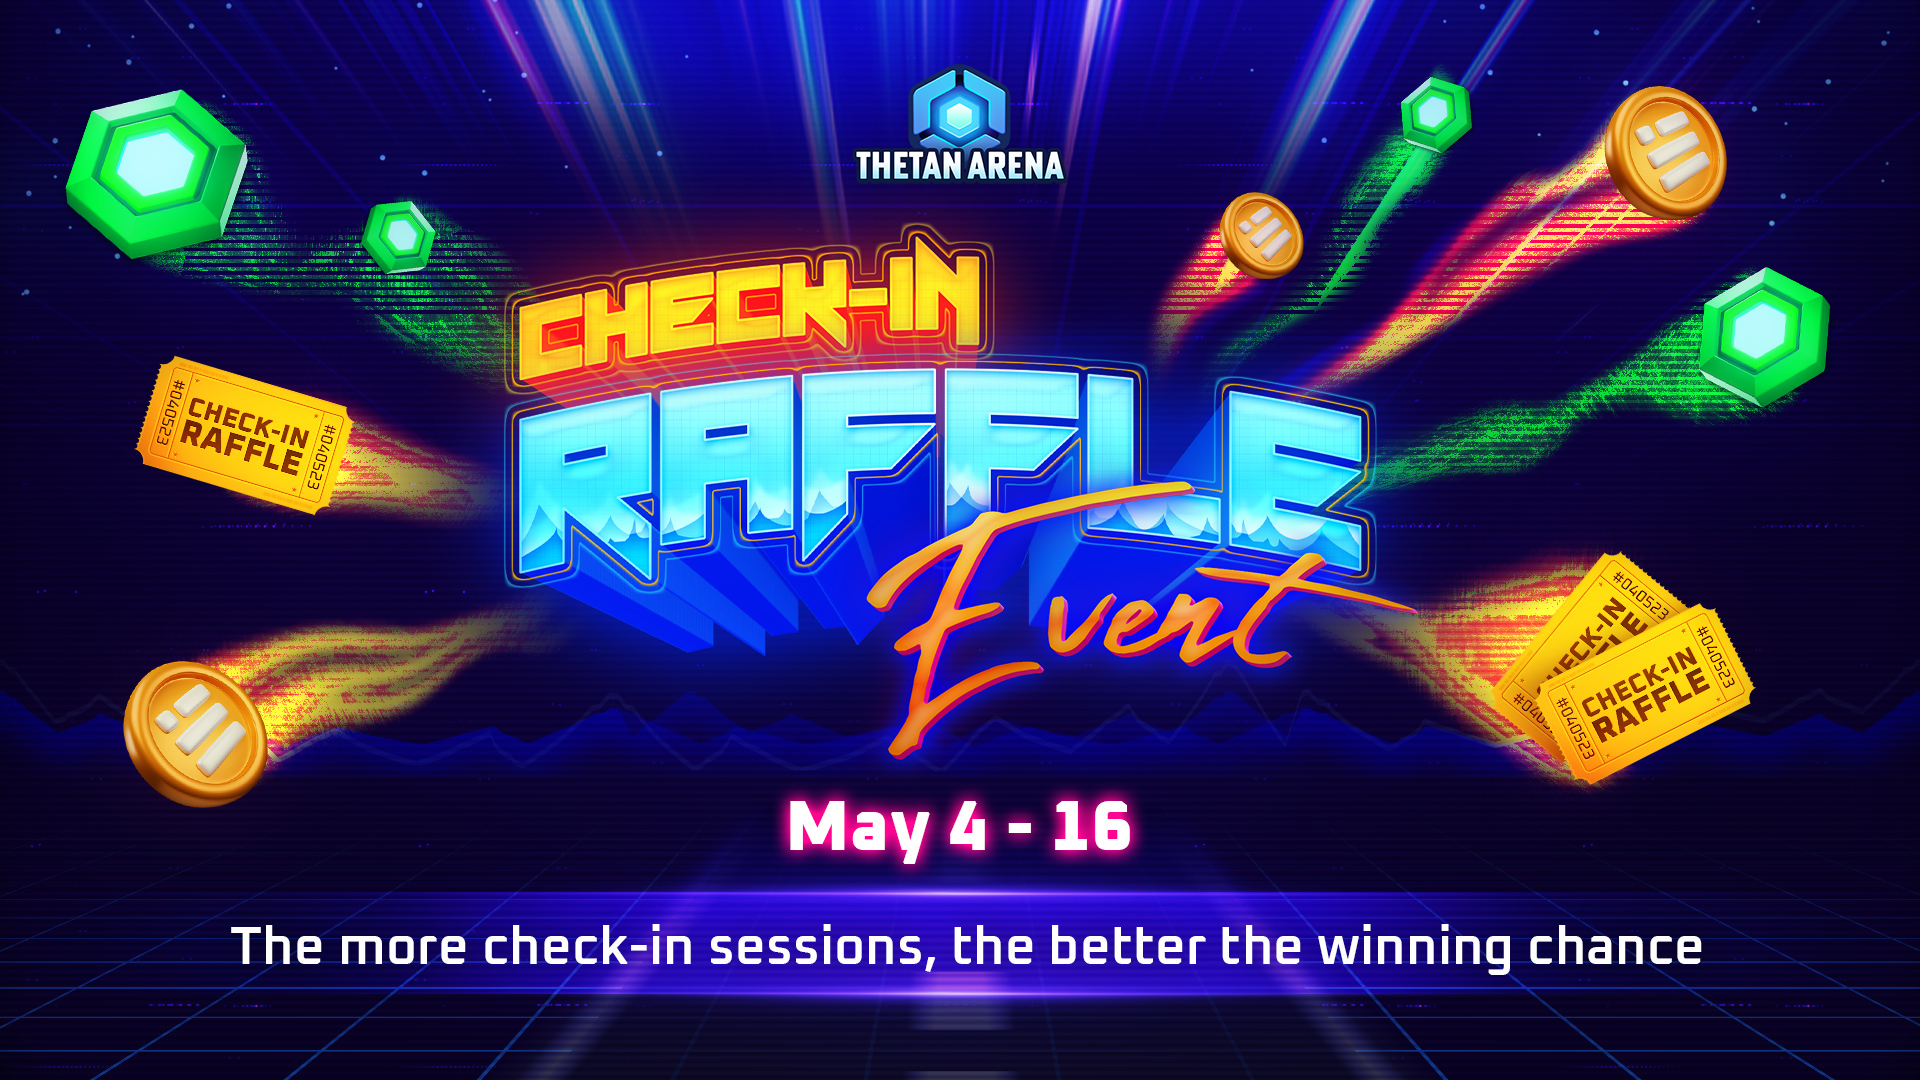 Join The Check-In Raffle Event To Take Home The Prize